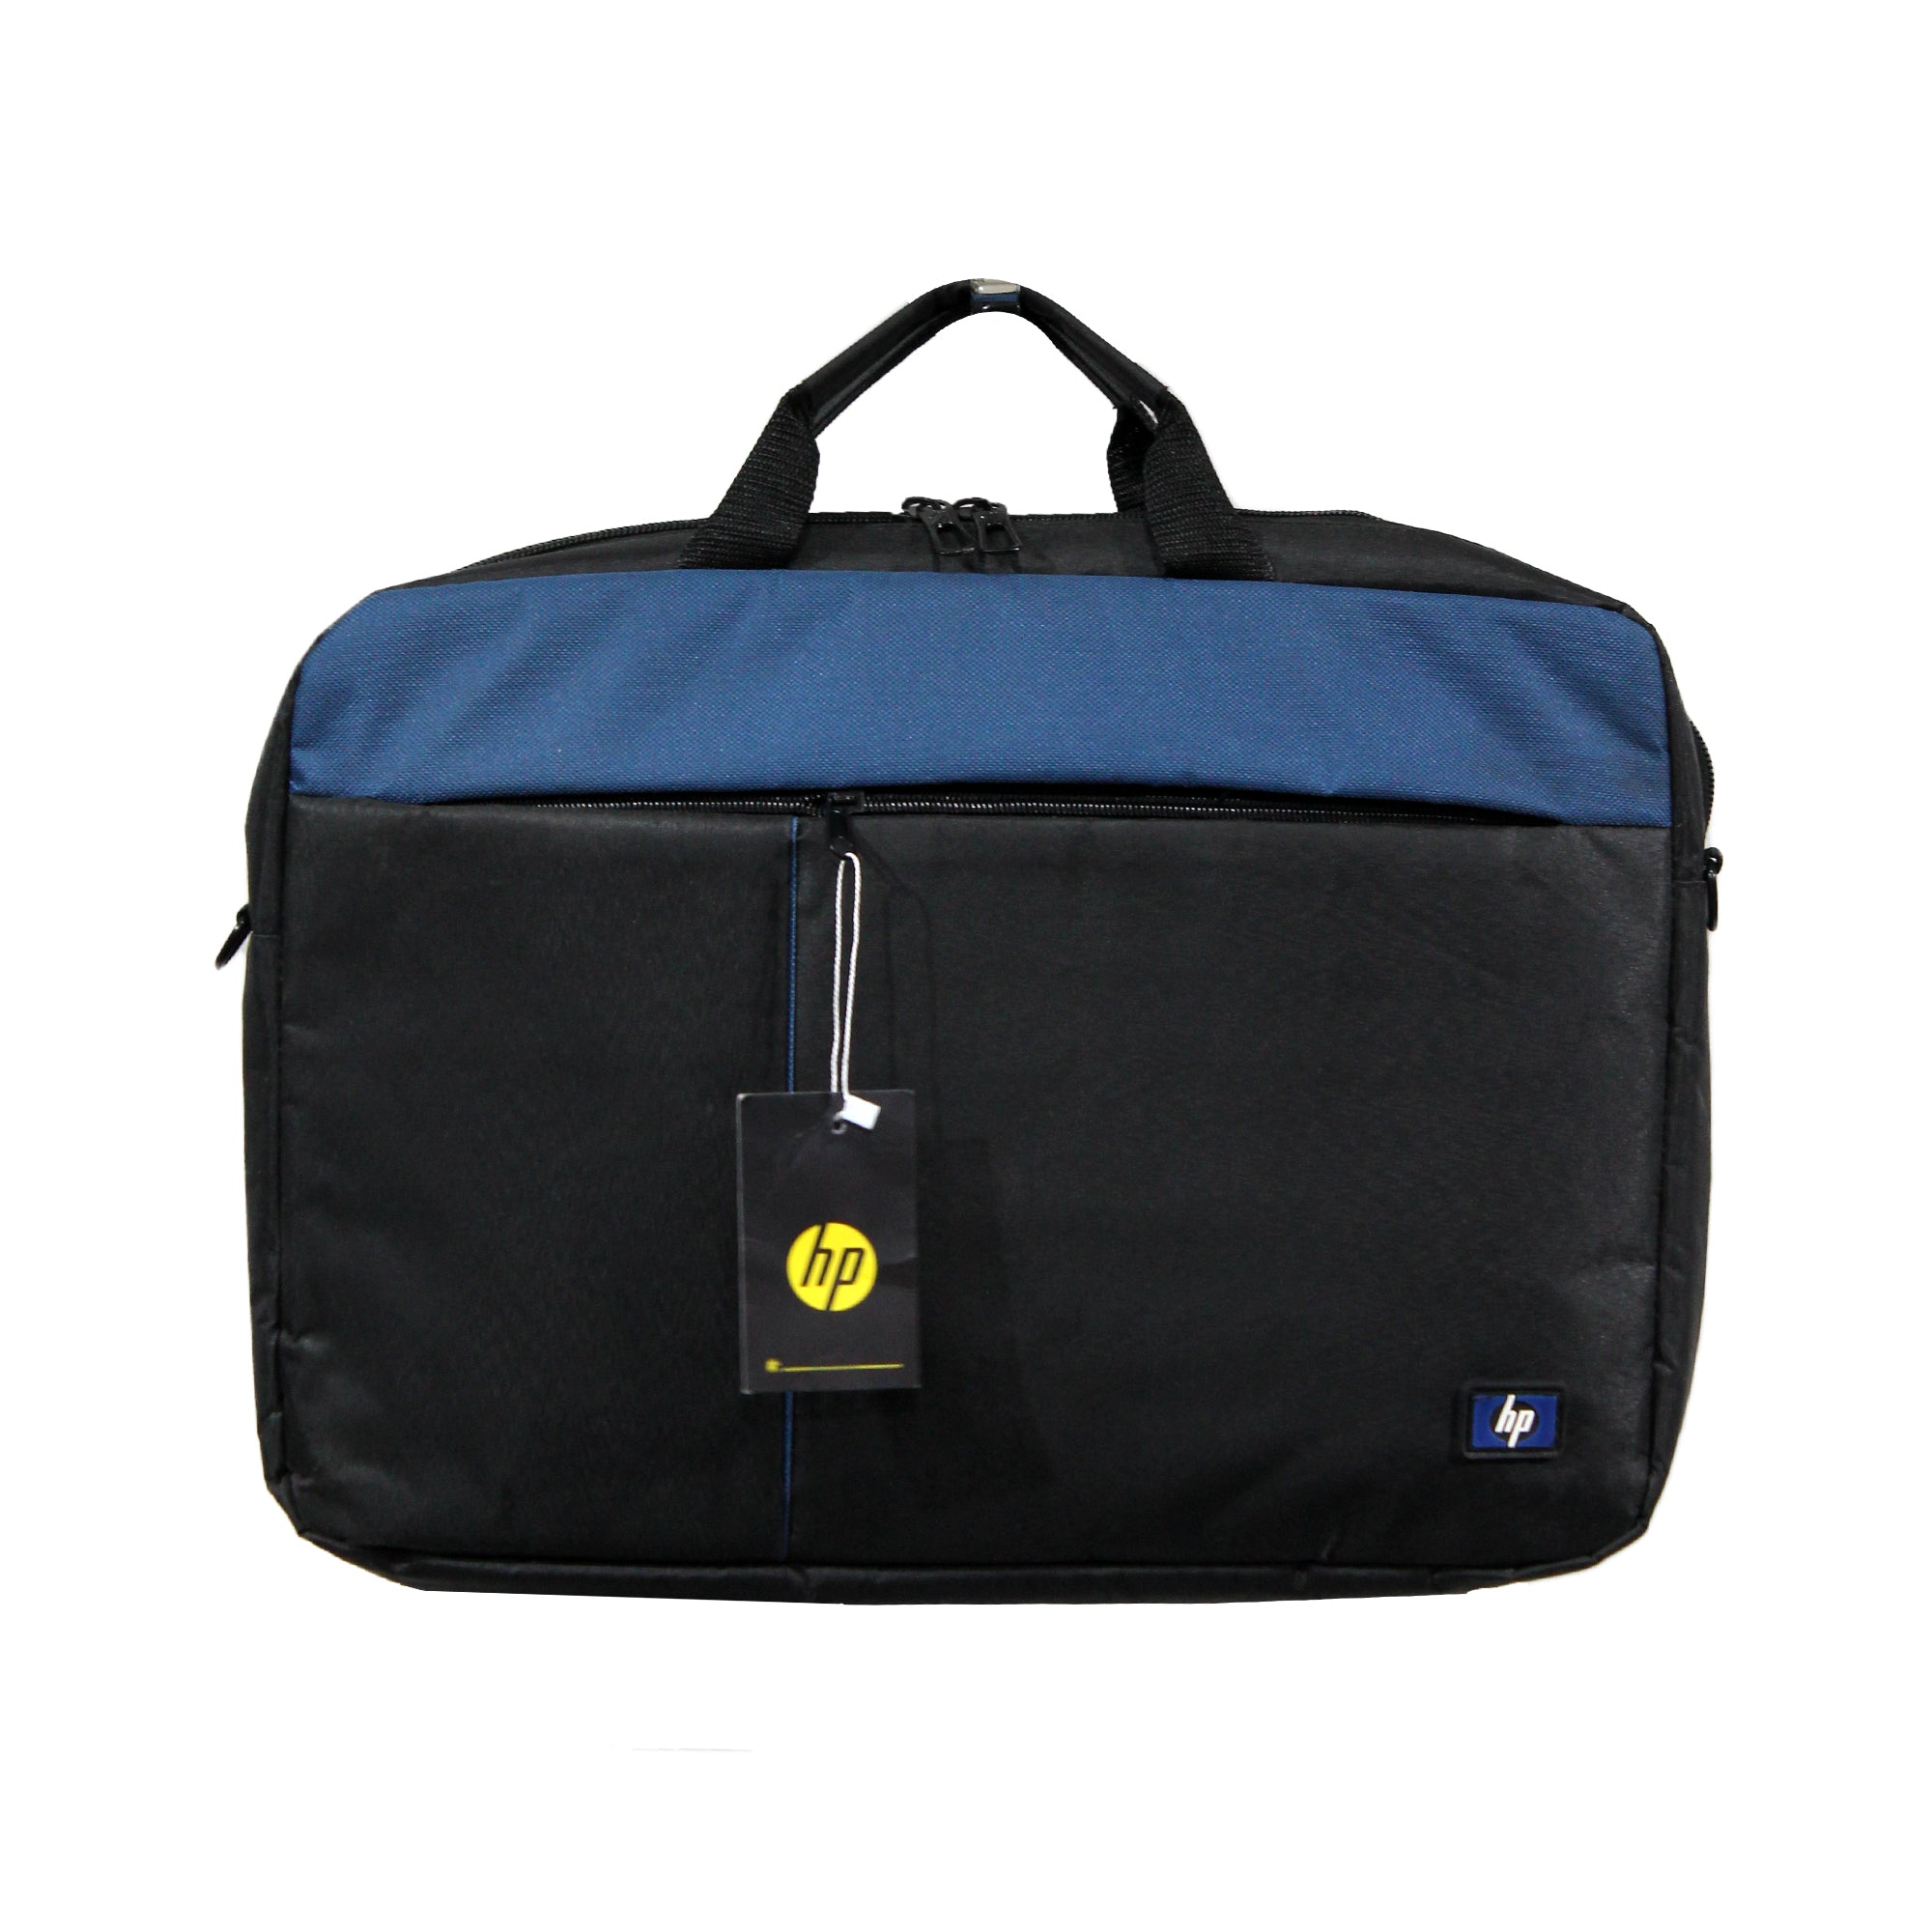 15.6 Inch Laptop File Bag for Easy Hand Carry